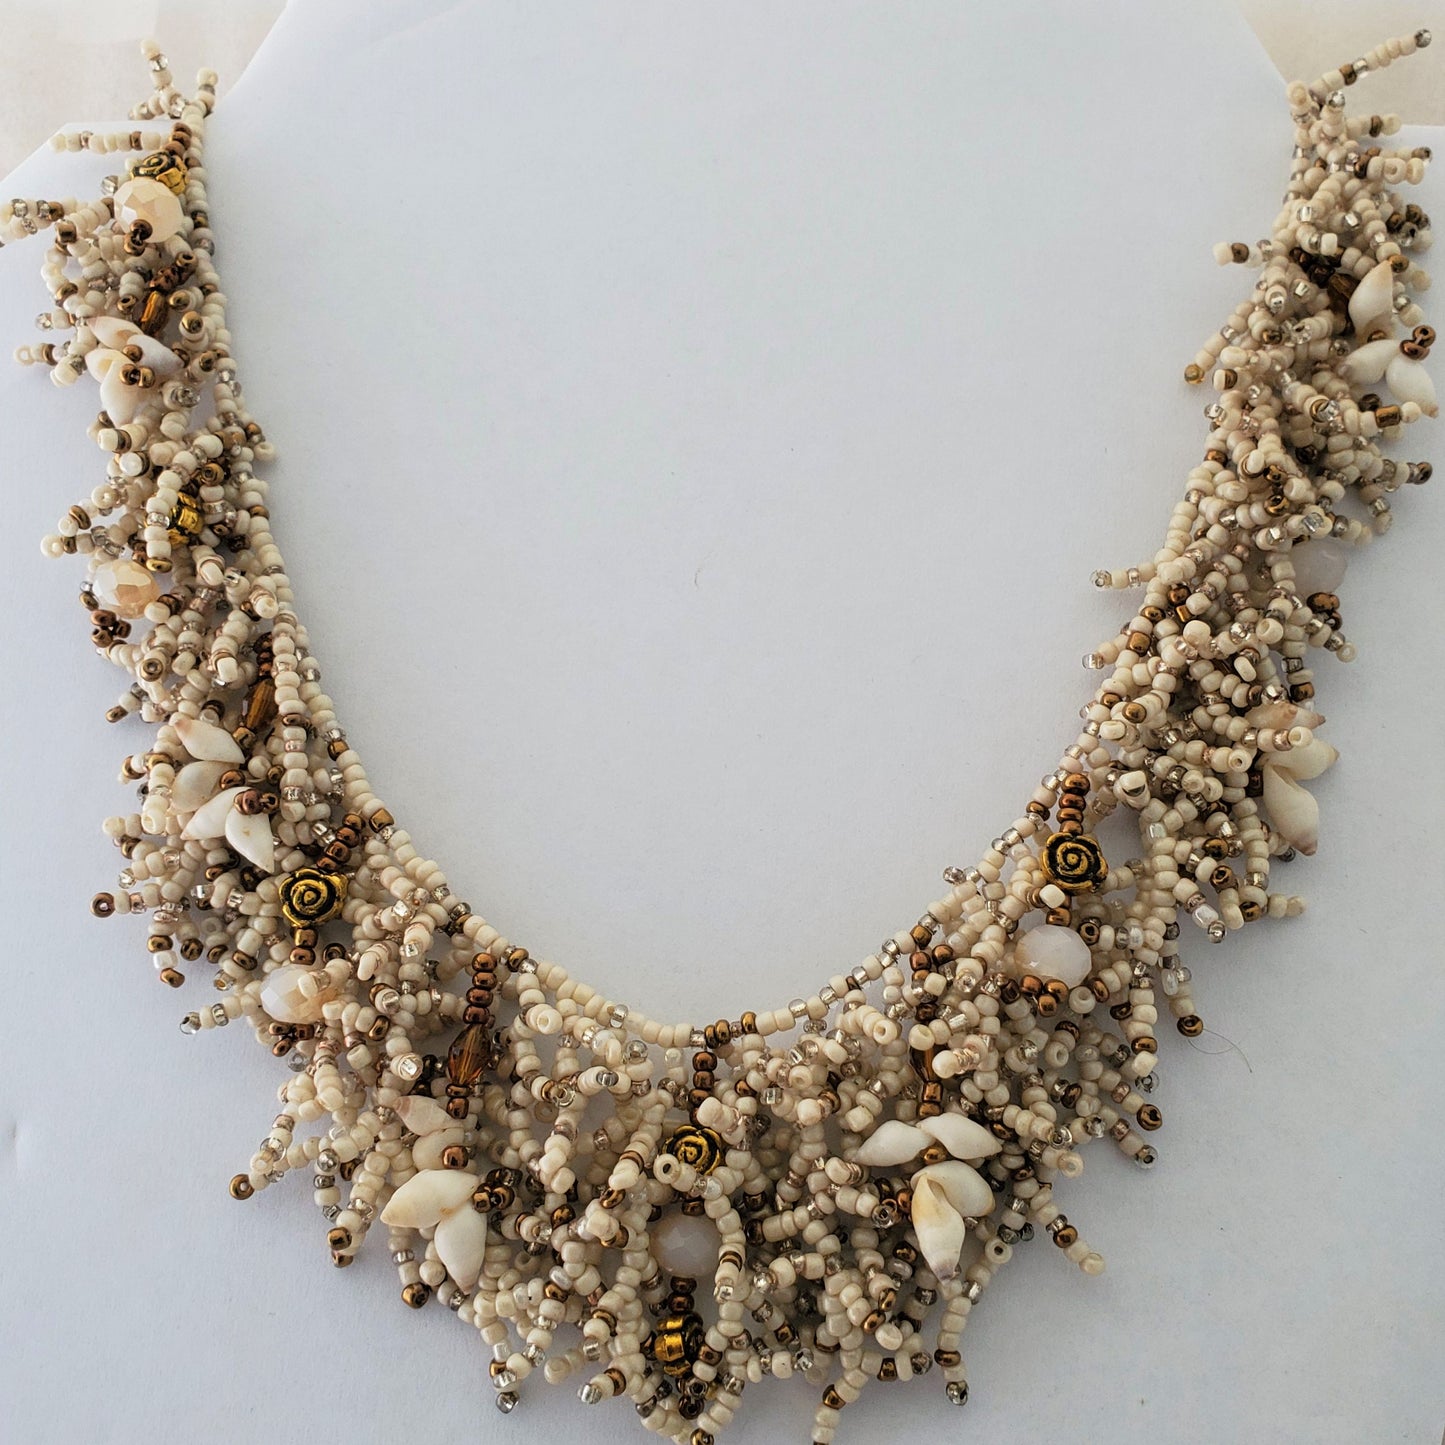 Hand made Coral Form Necklace - Cone Shells & Recycled Glass